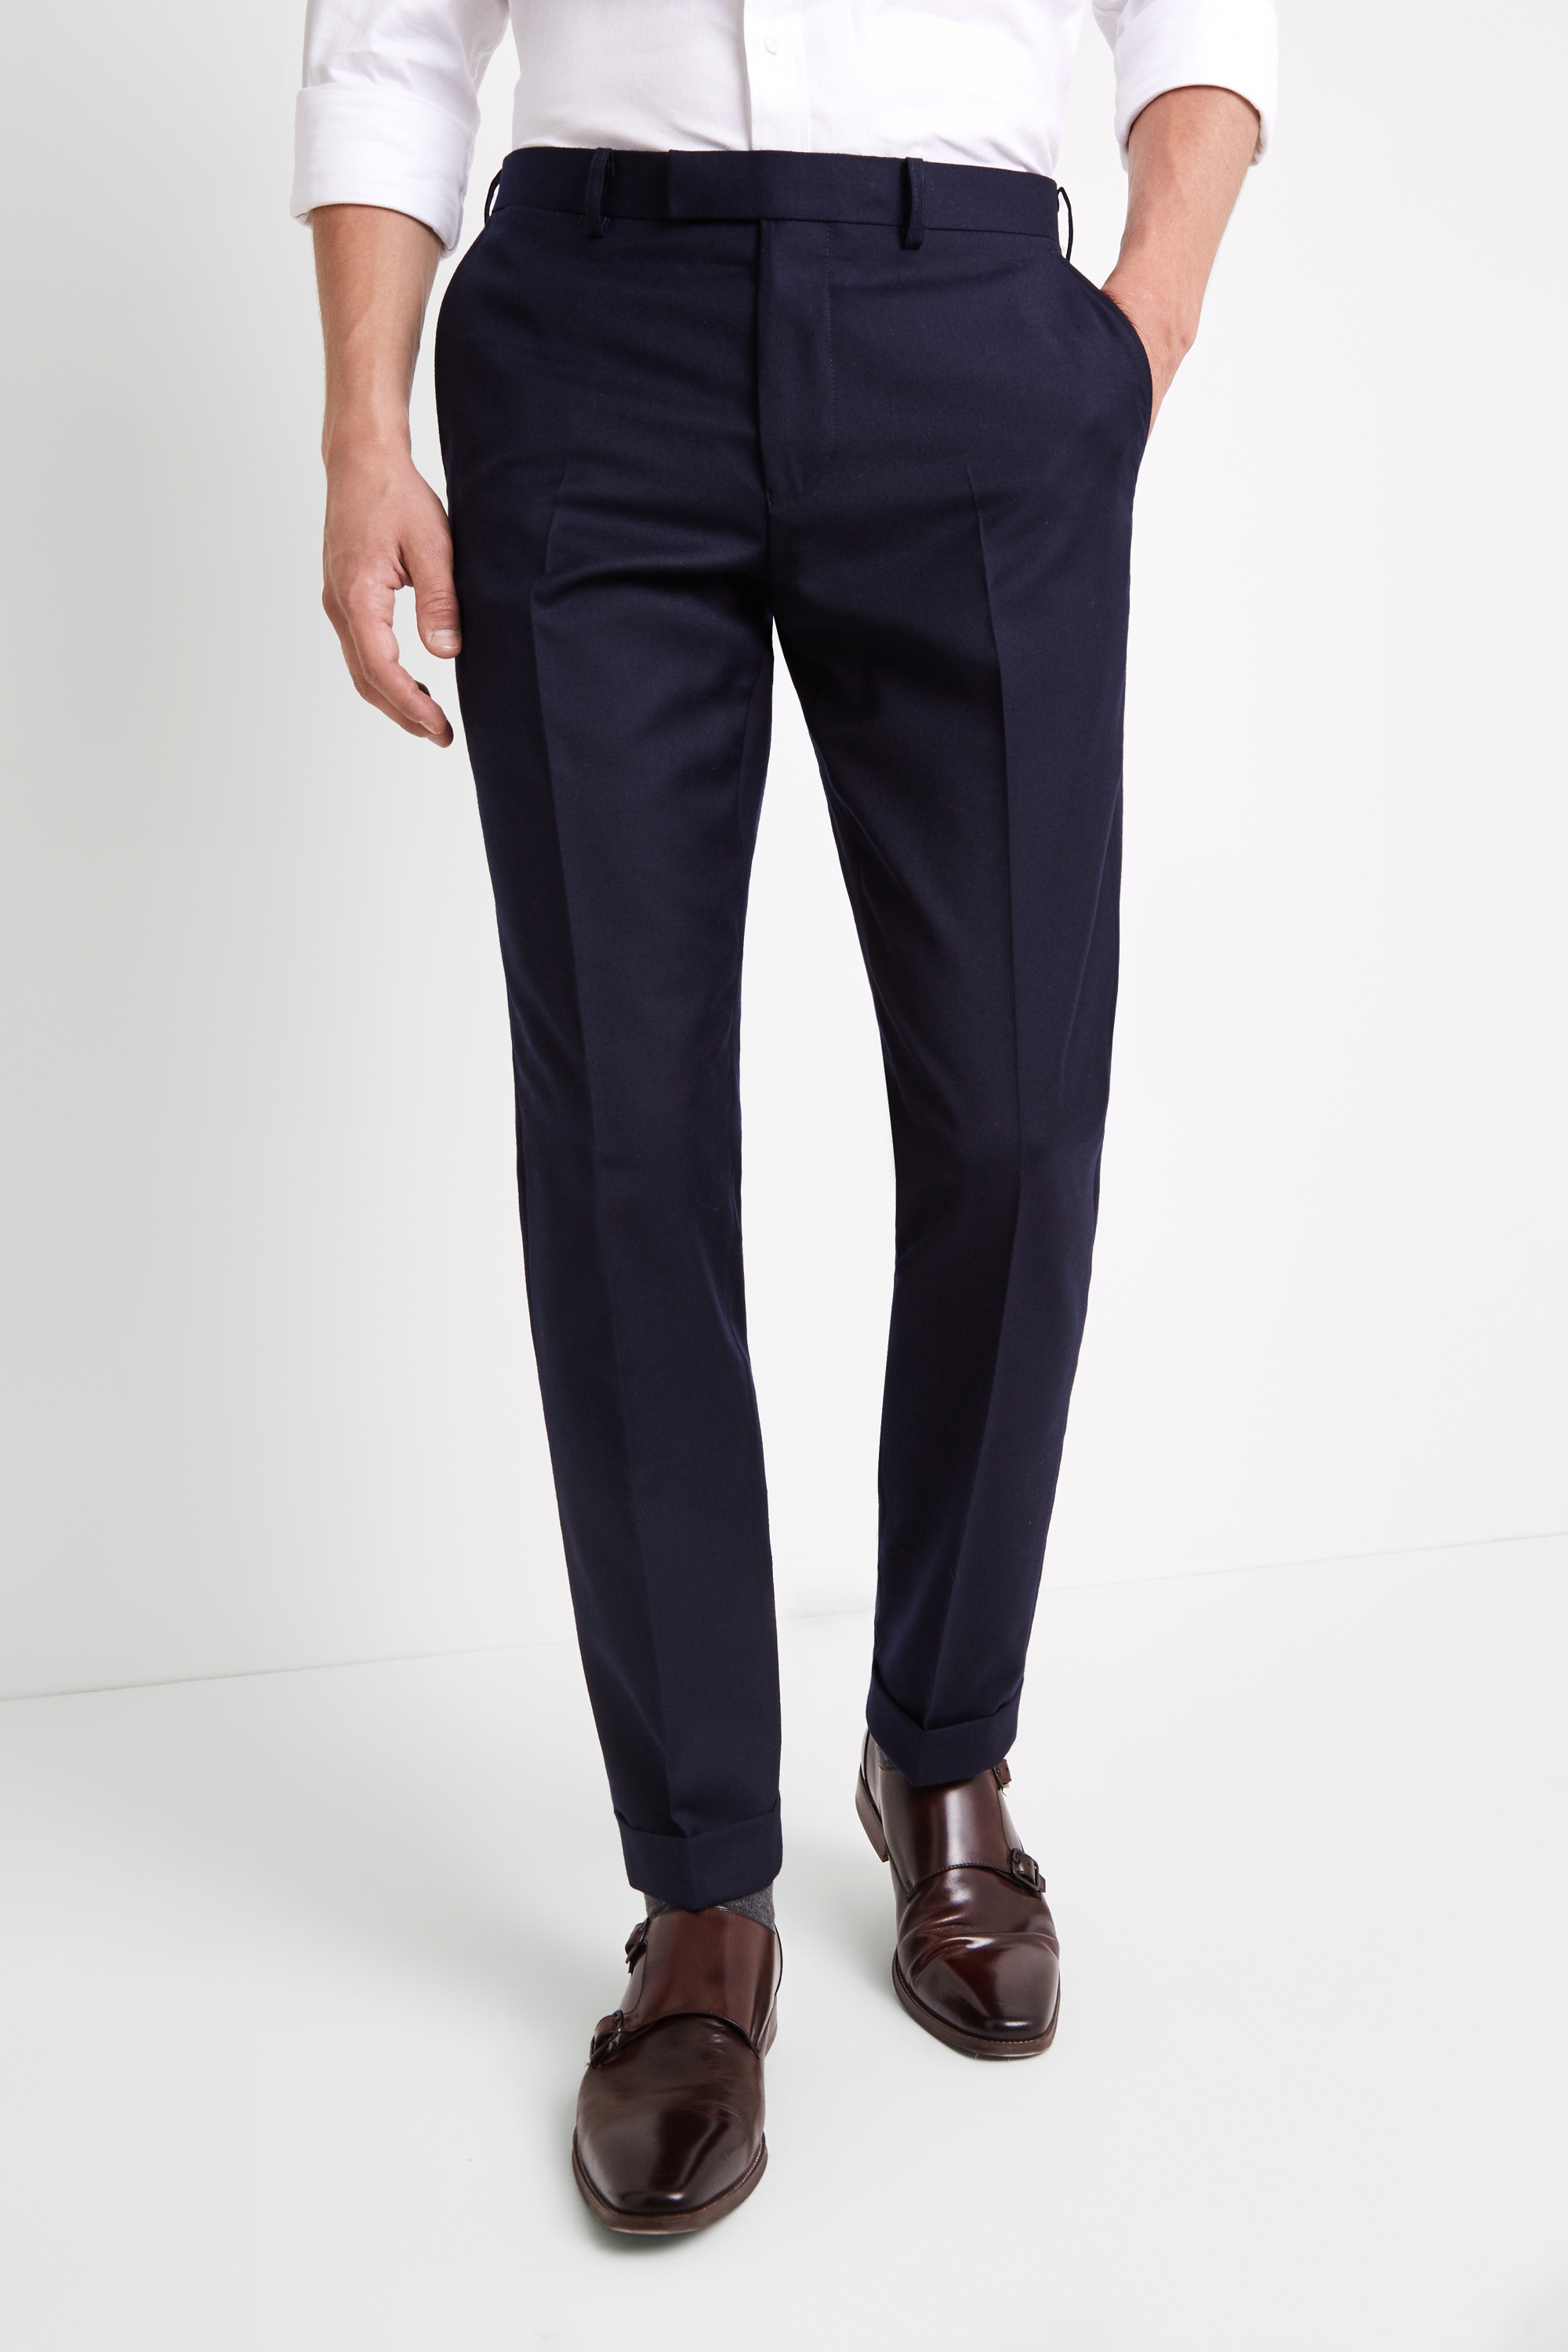 Moss 1851 Tailored Fit Navy Wool Rich Brushed Pants